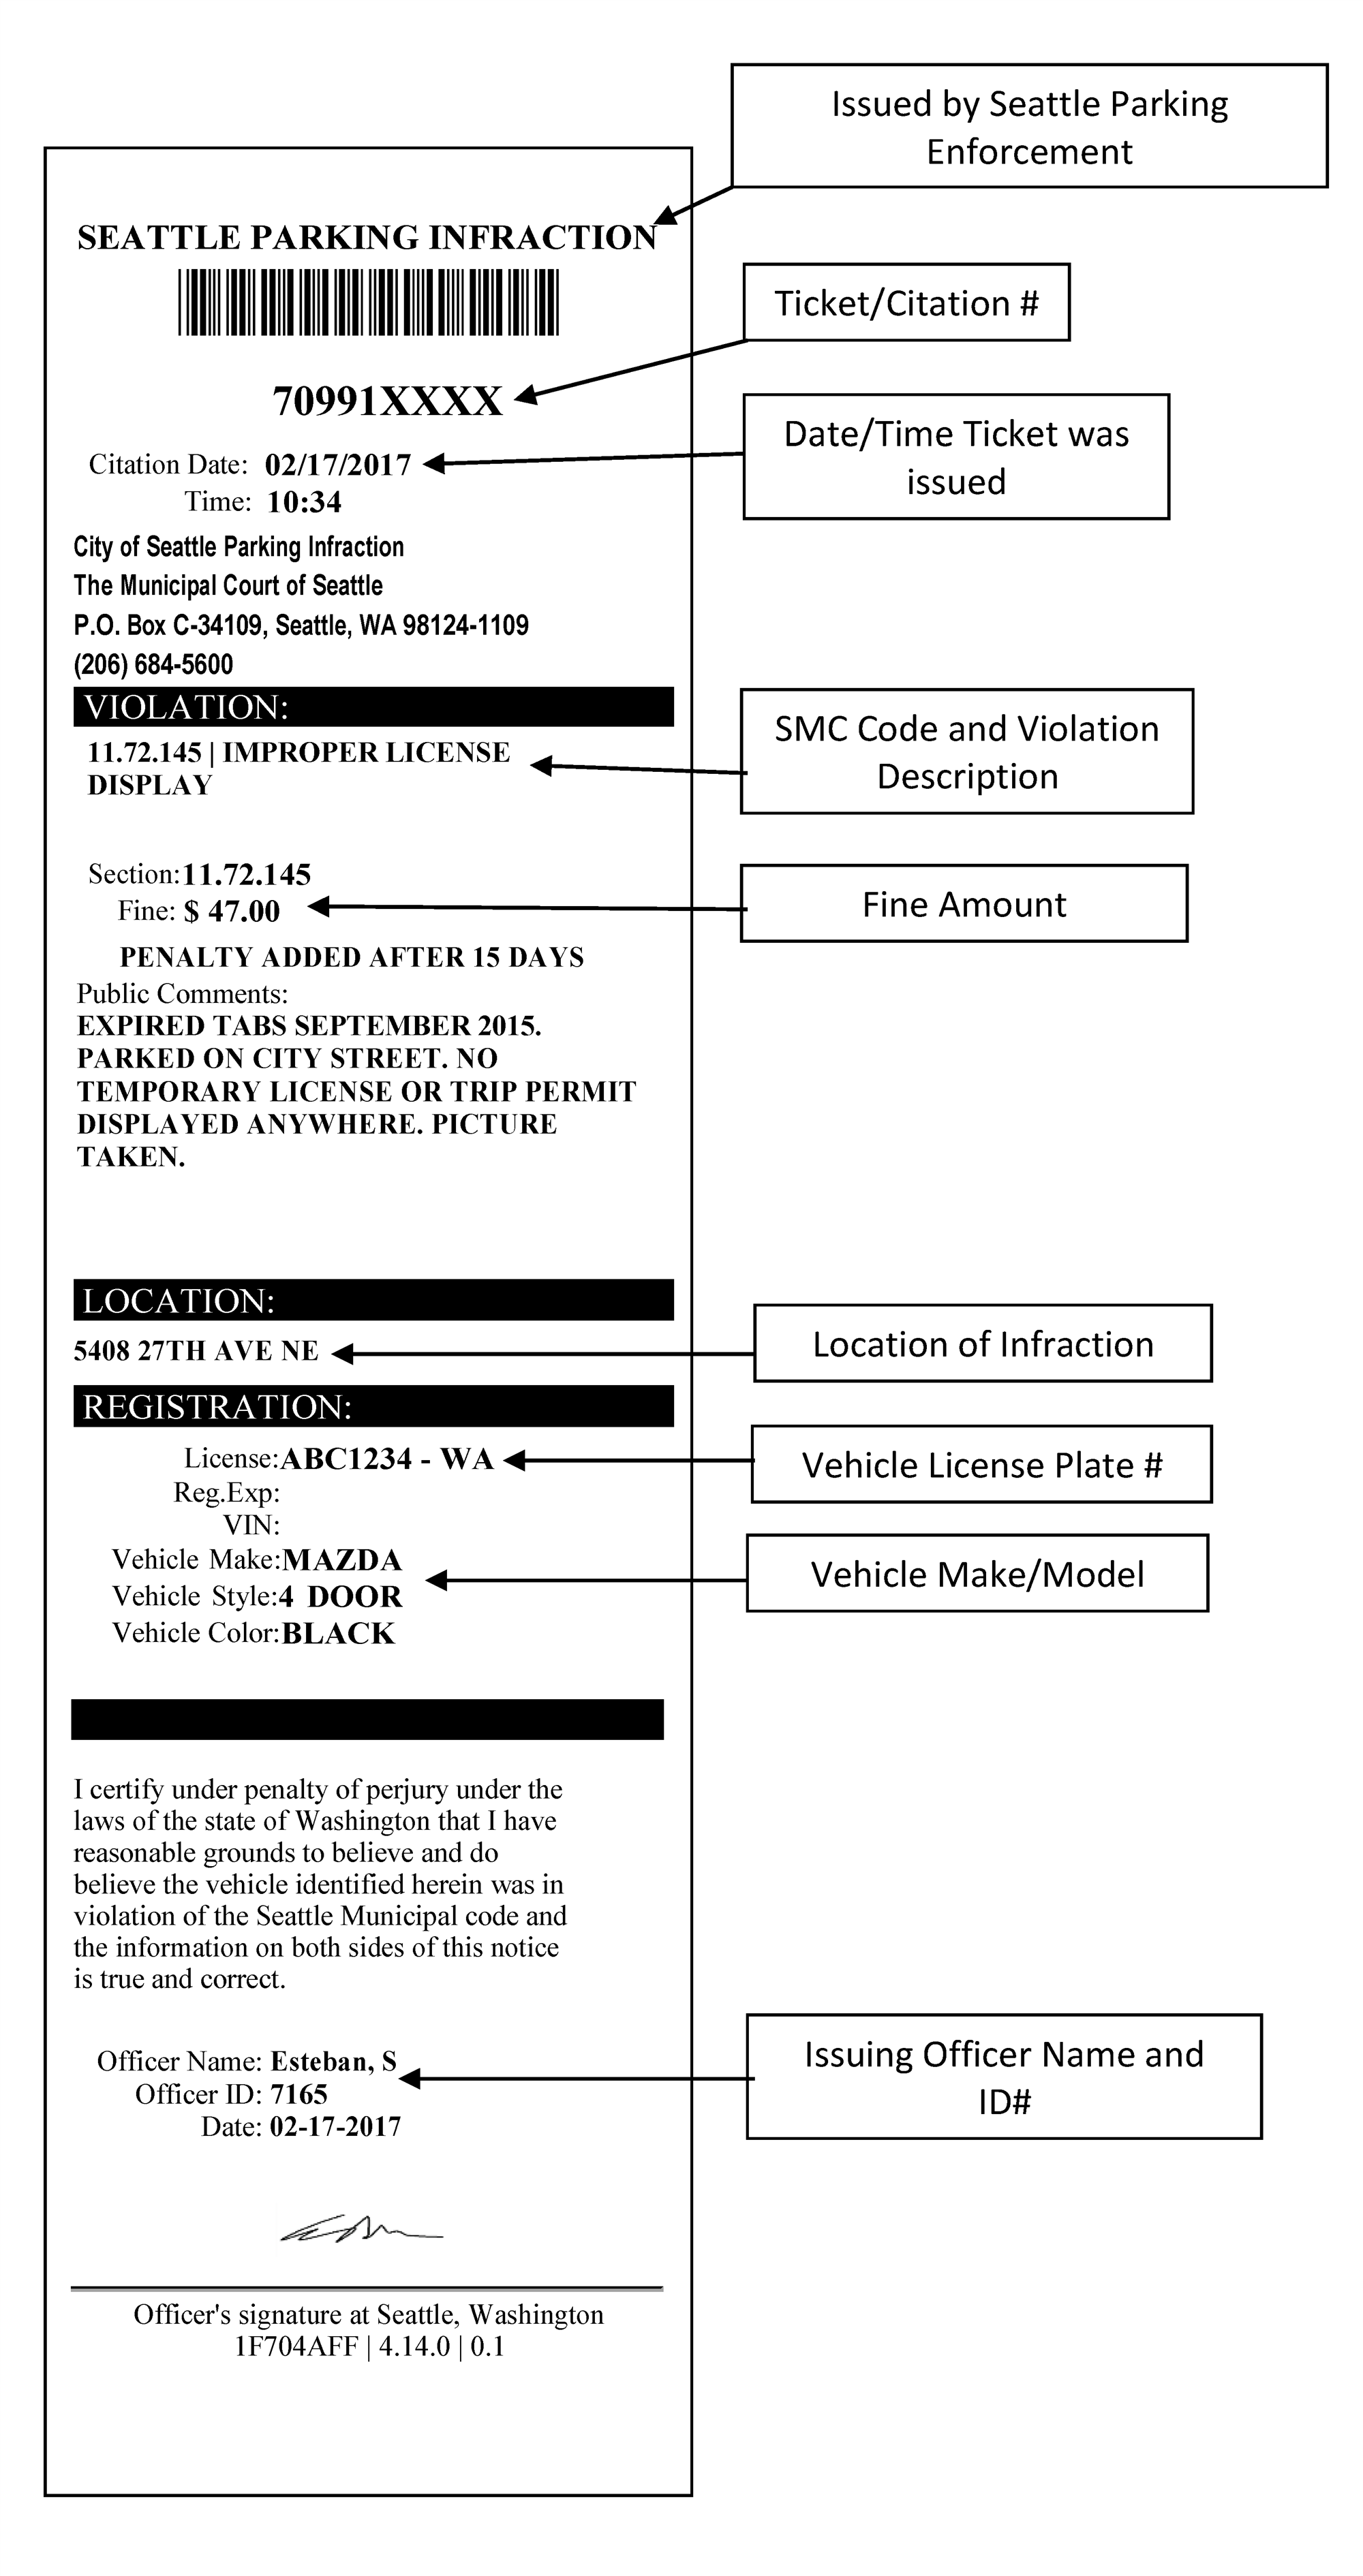 Example of Parking Citation